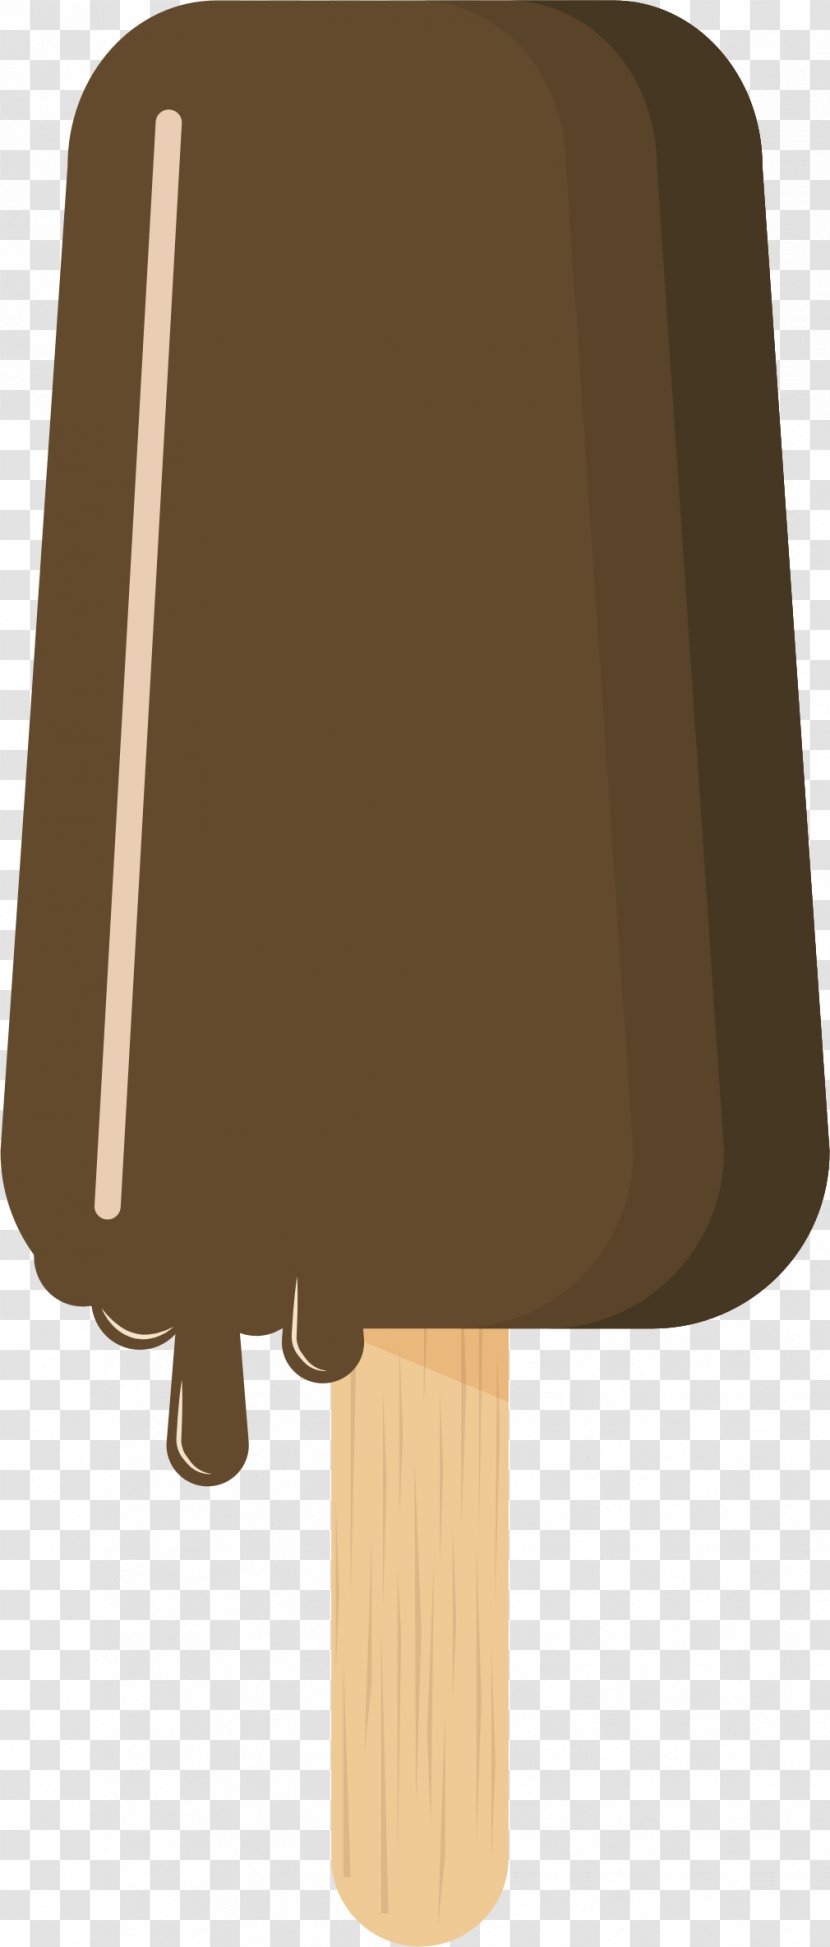 Confectionery Frozen Food Clip Art Ice Cream Chocolate Bar - Melting - Melted Transparent PNG